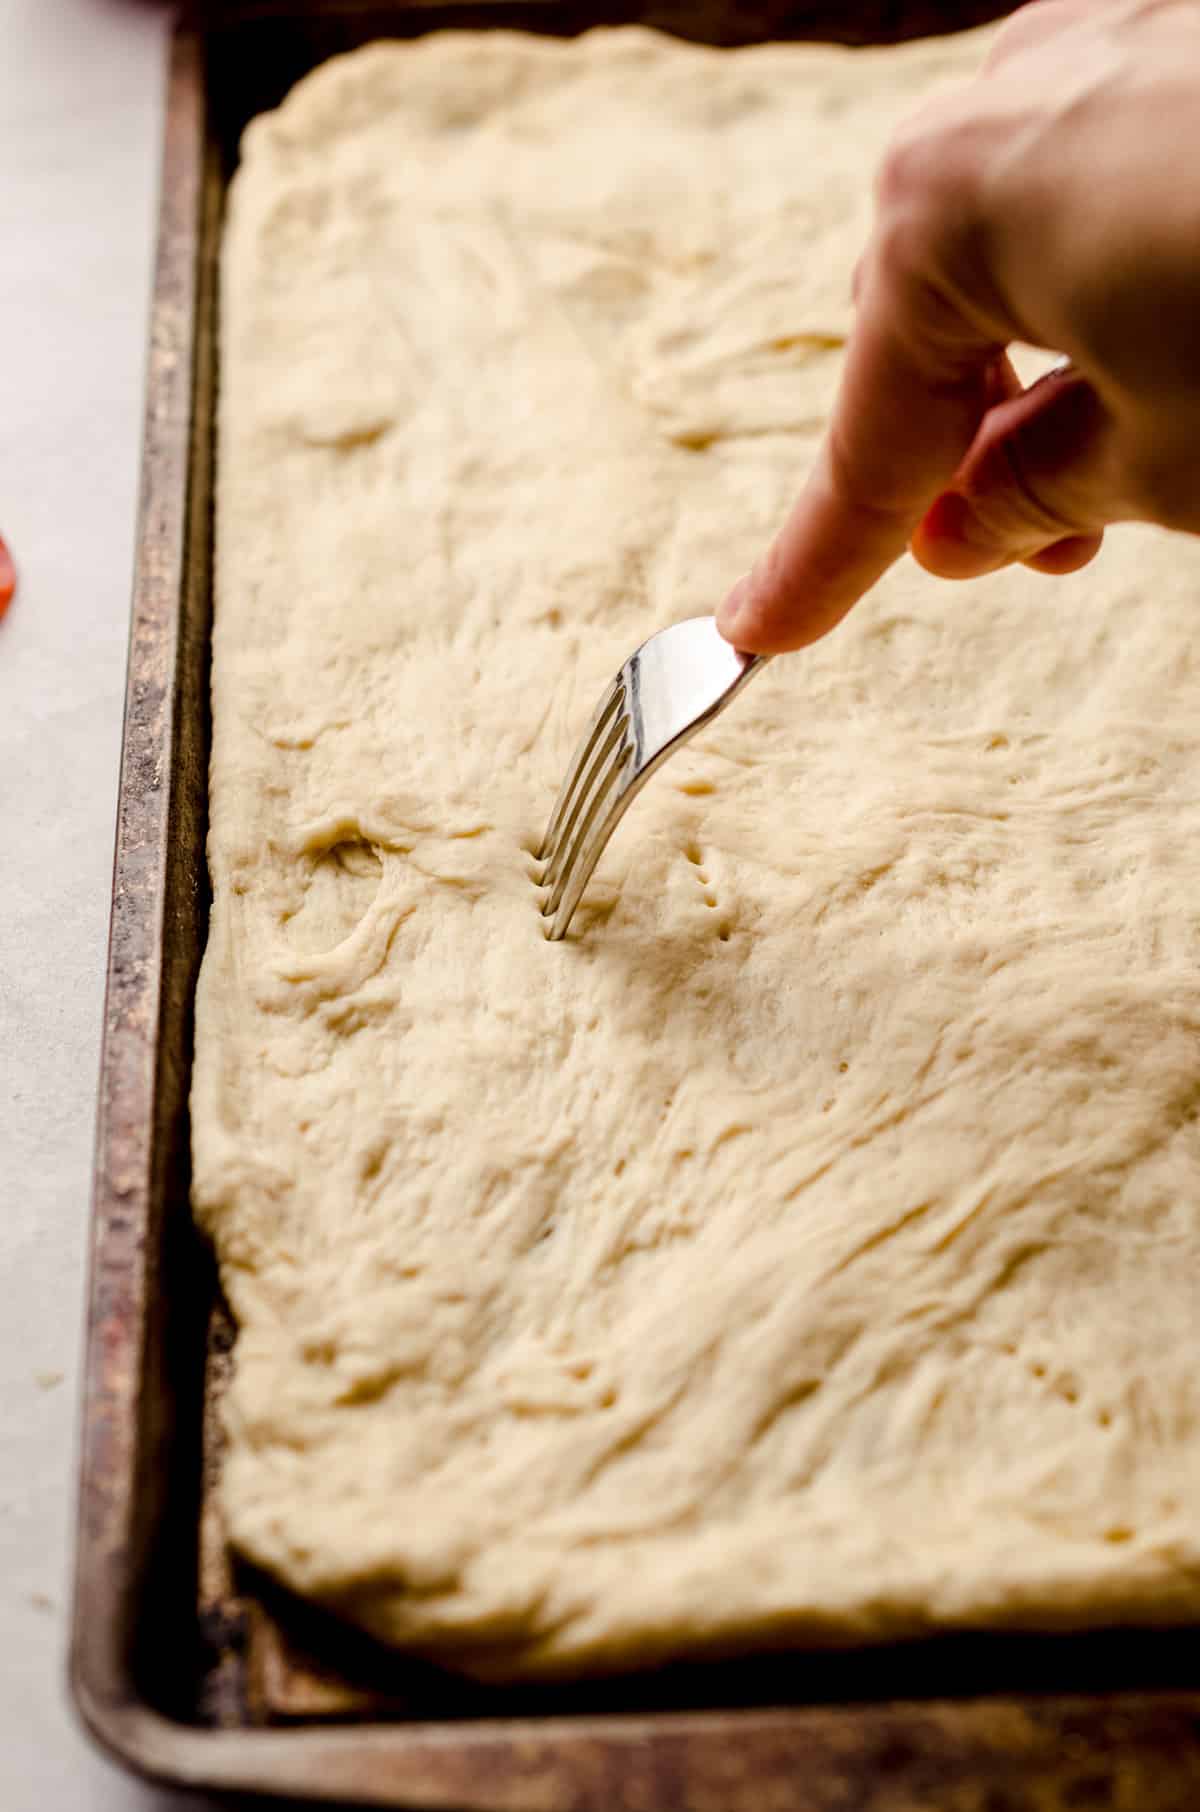 Pricking the surface of a pizza dough, fitted into the sheet pan.